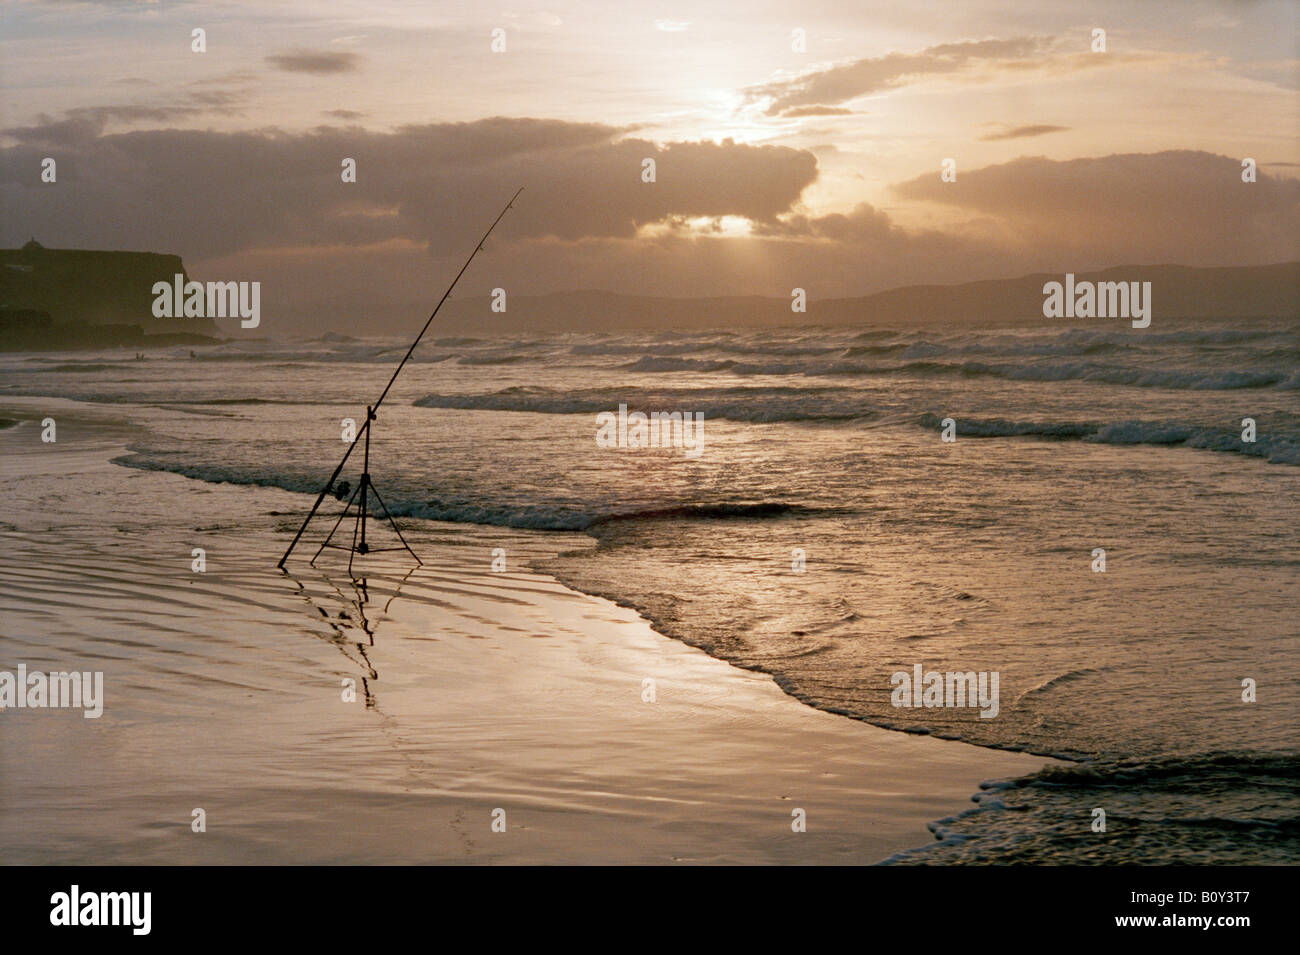 Sea fishing rod on a tripod on a beach with incoming tide at